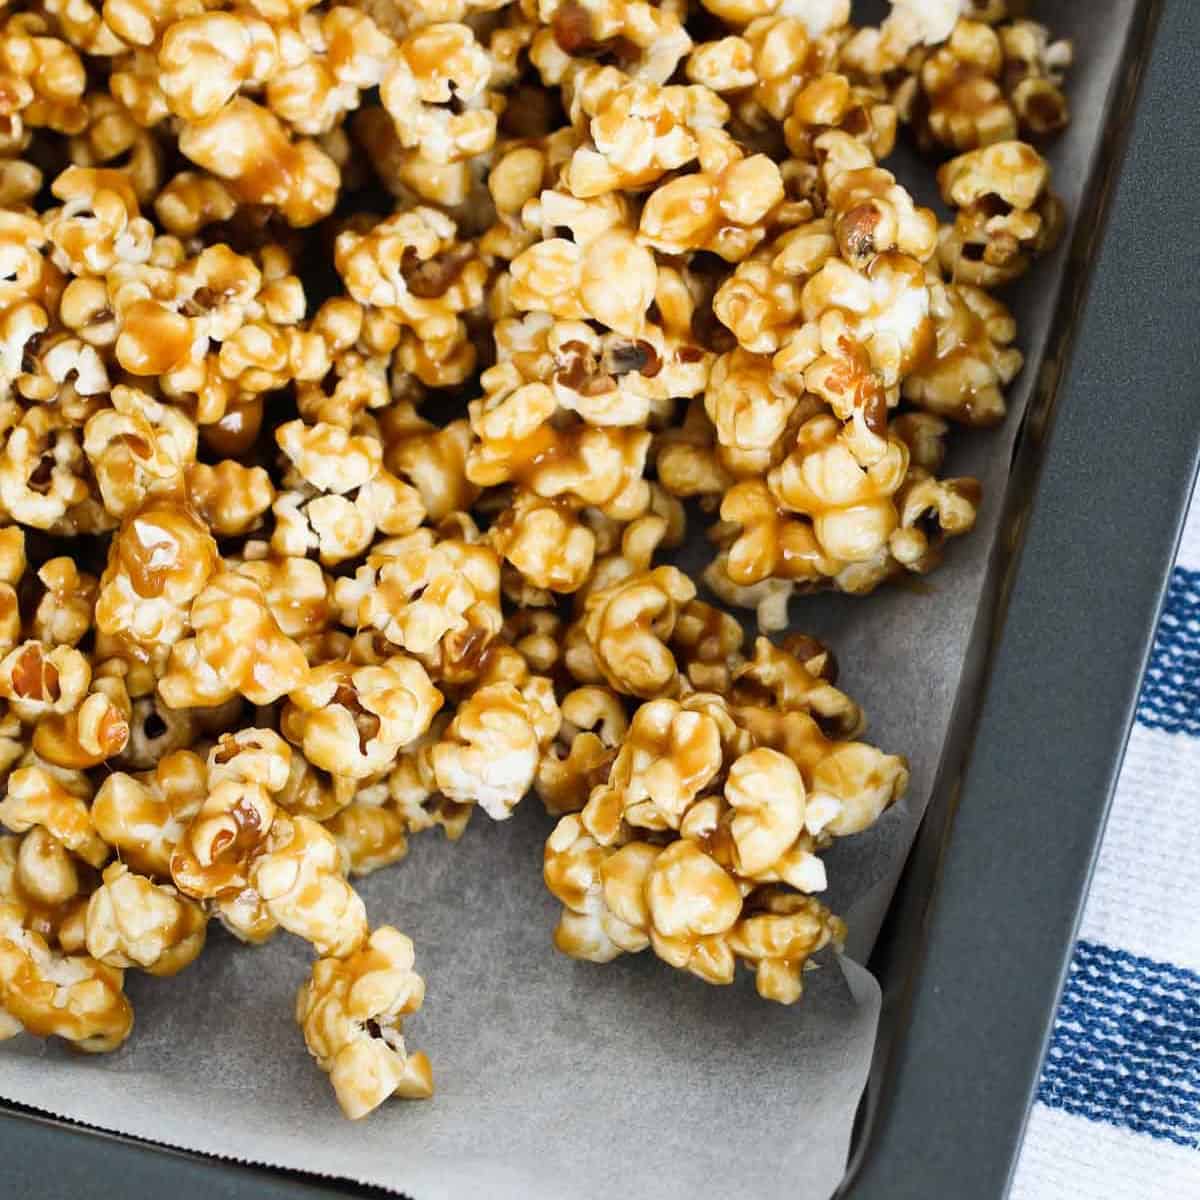 How to Make Perfect Caramel Popcorn at Home